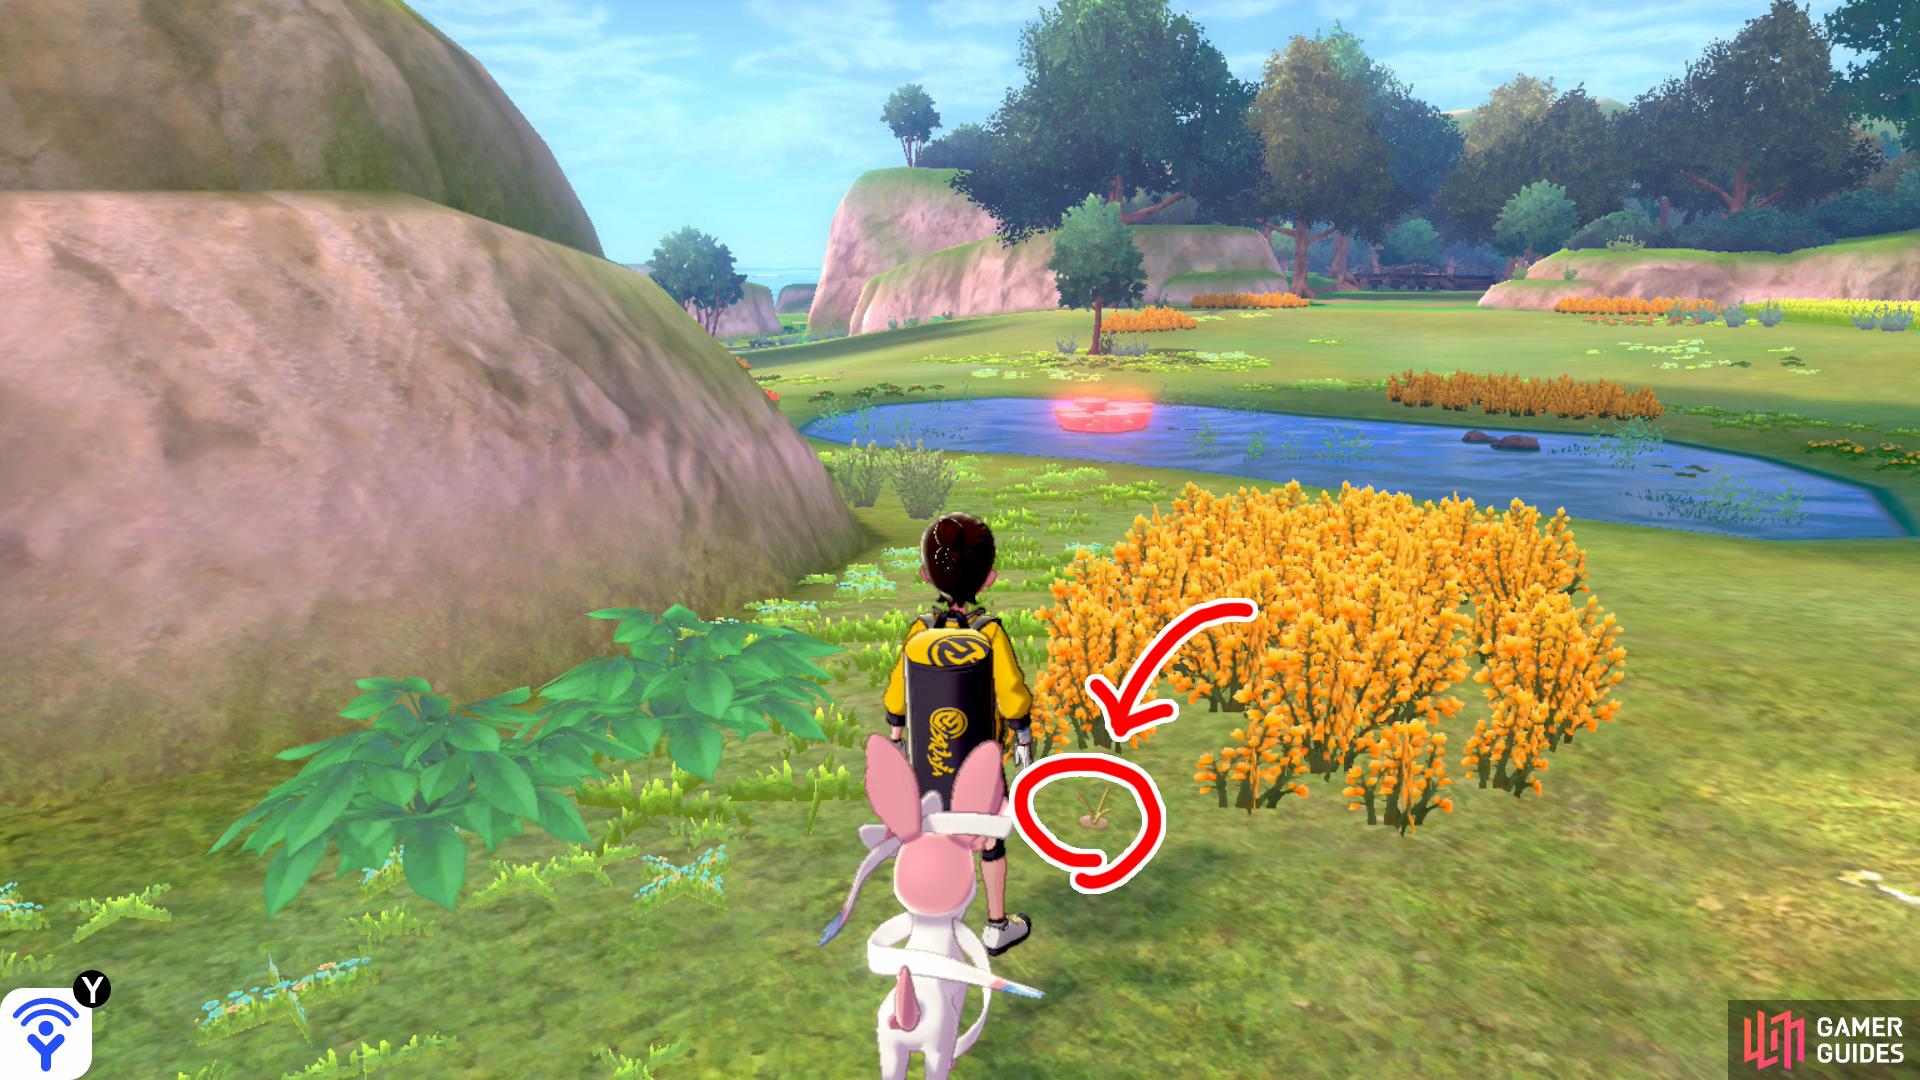 8/20: From Diglett 7, face the log/cliff wall. Turn right and follow the wall. Go past the long stretch of tall grass and the tall vegetation on the left. Before the next shallow pool, search in front of the tall yellow grass.